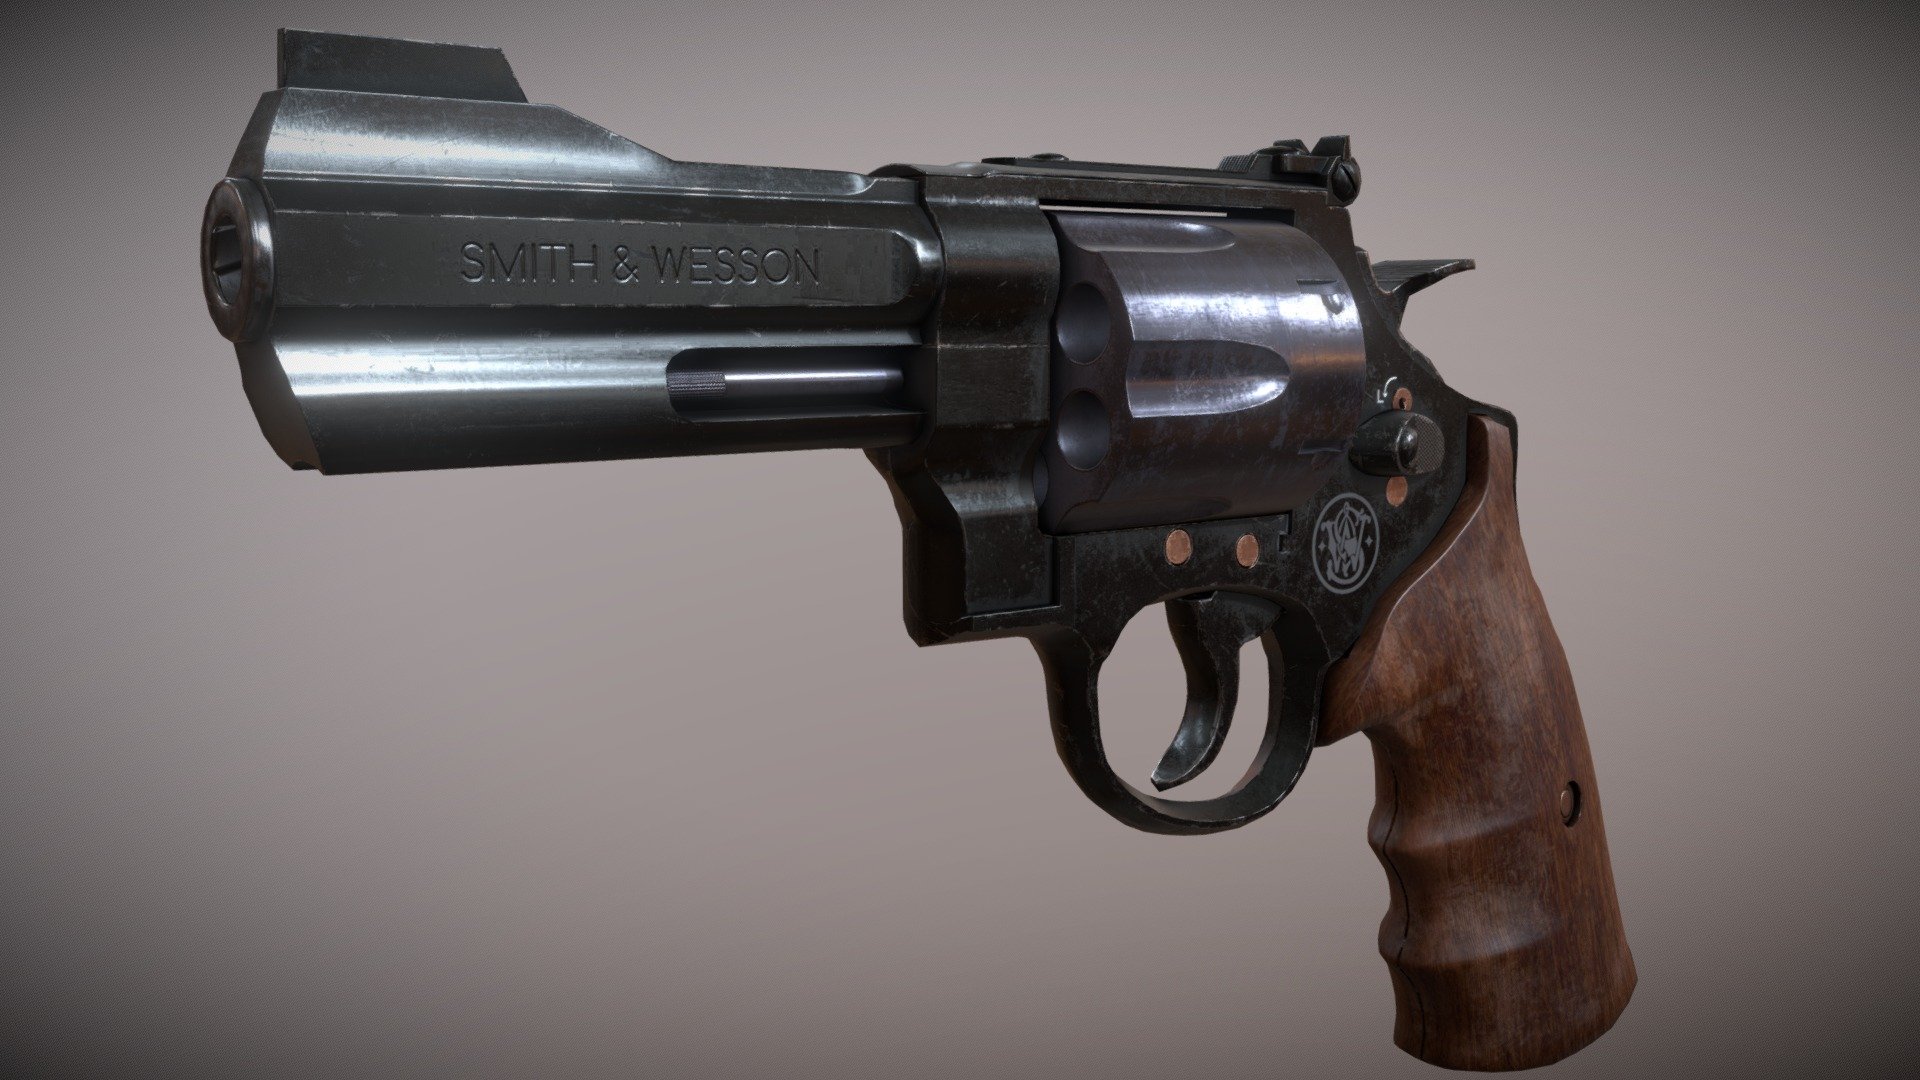 Smith &amp; Wesson .44 revolver modeled in blender and textured using substance painter and designer. All moving parts are separate, for fps animations 3d model